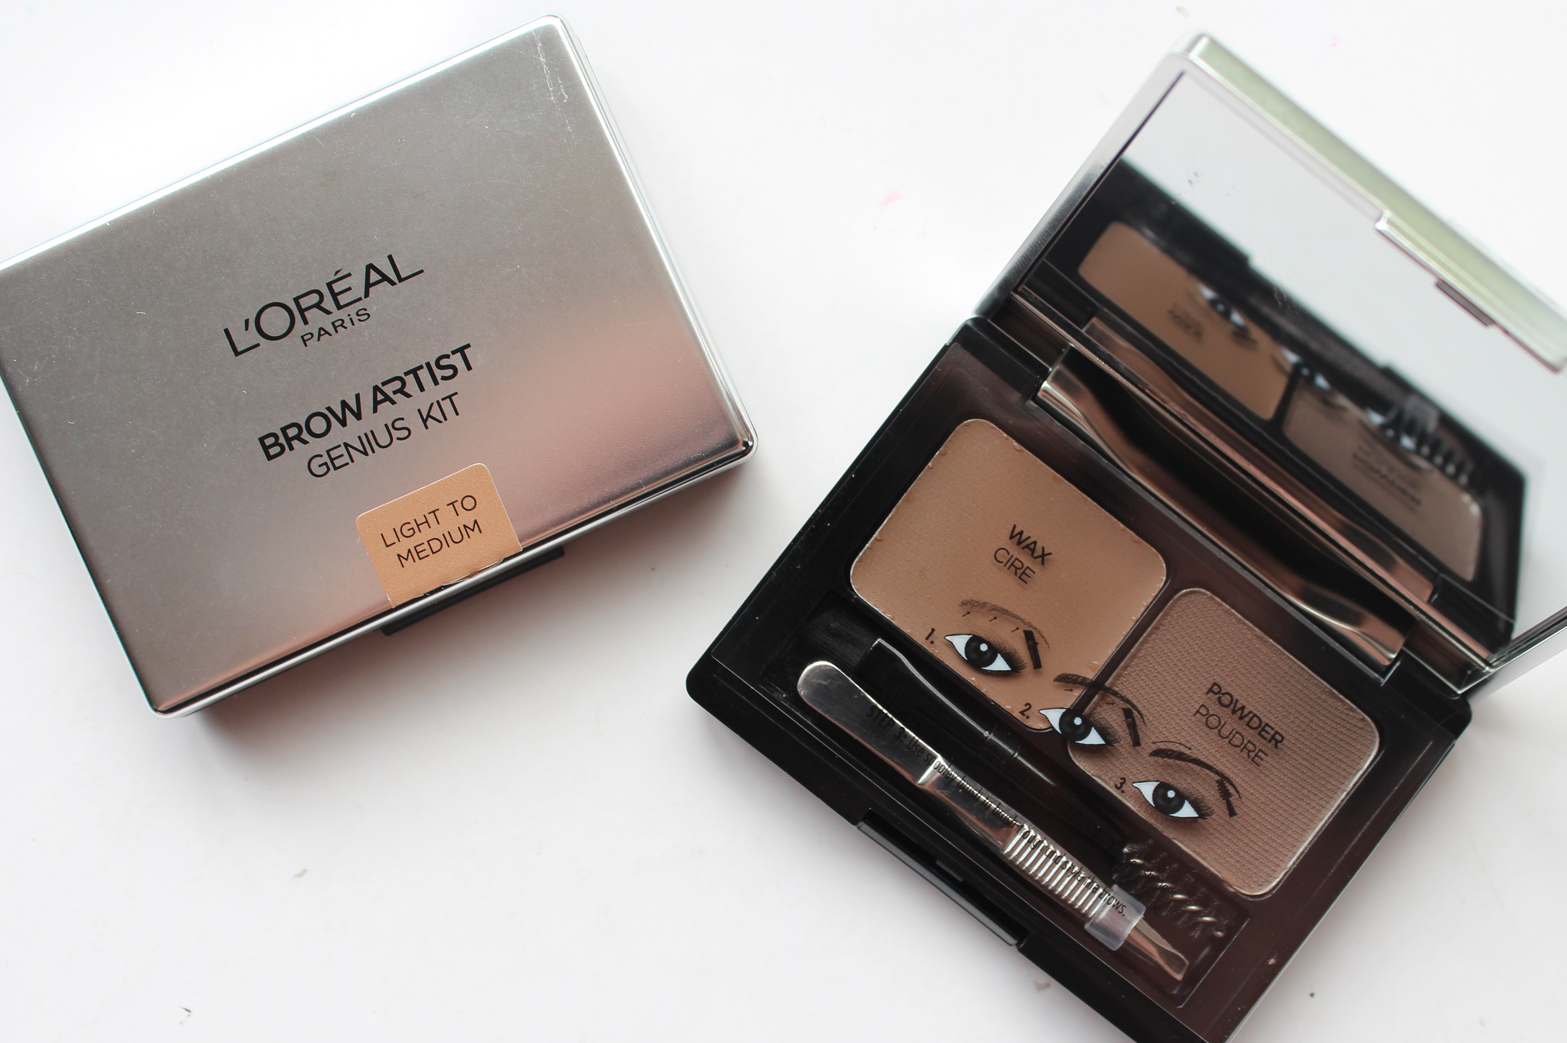 L'OREAL PARIS | New Releases October/November '15 - Review + Swatches - Brow Artist Genuis Kit - CassandraMyee